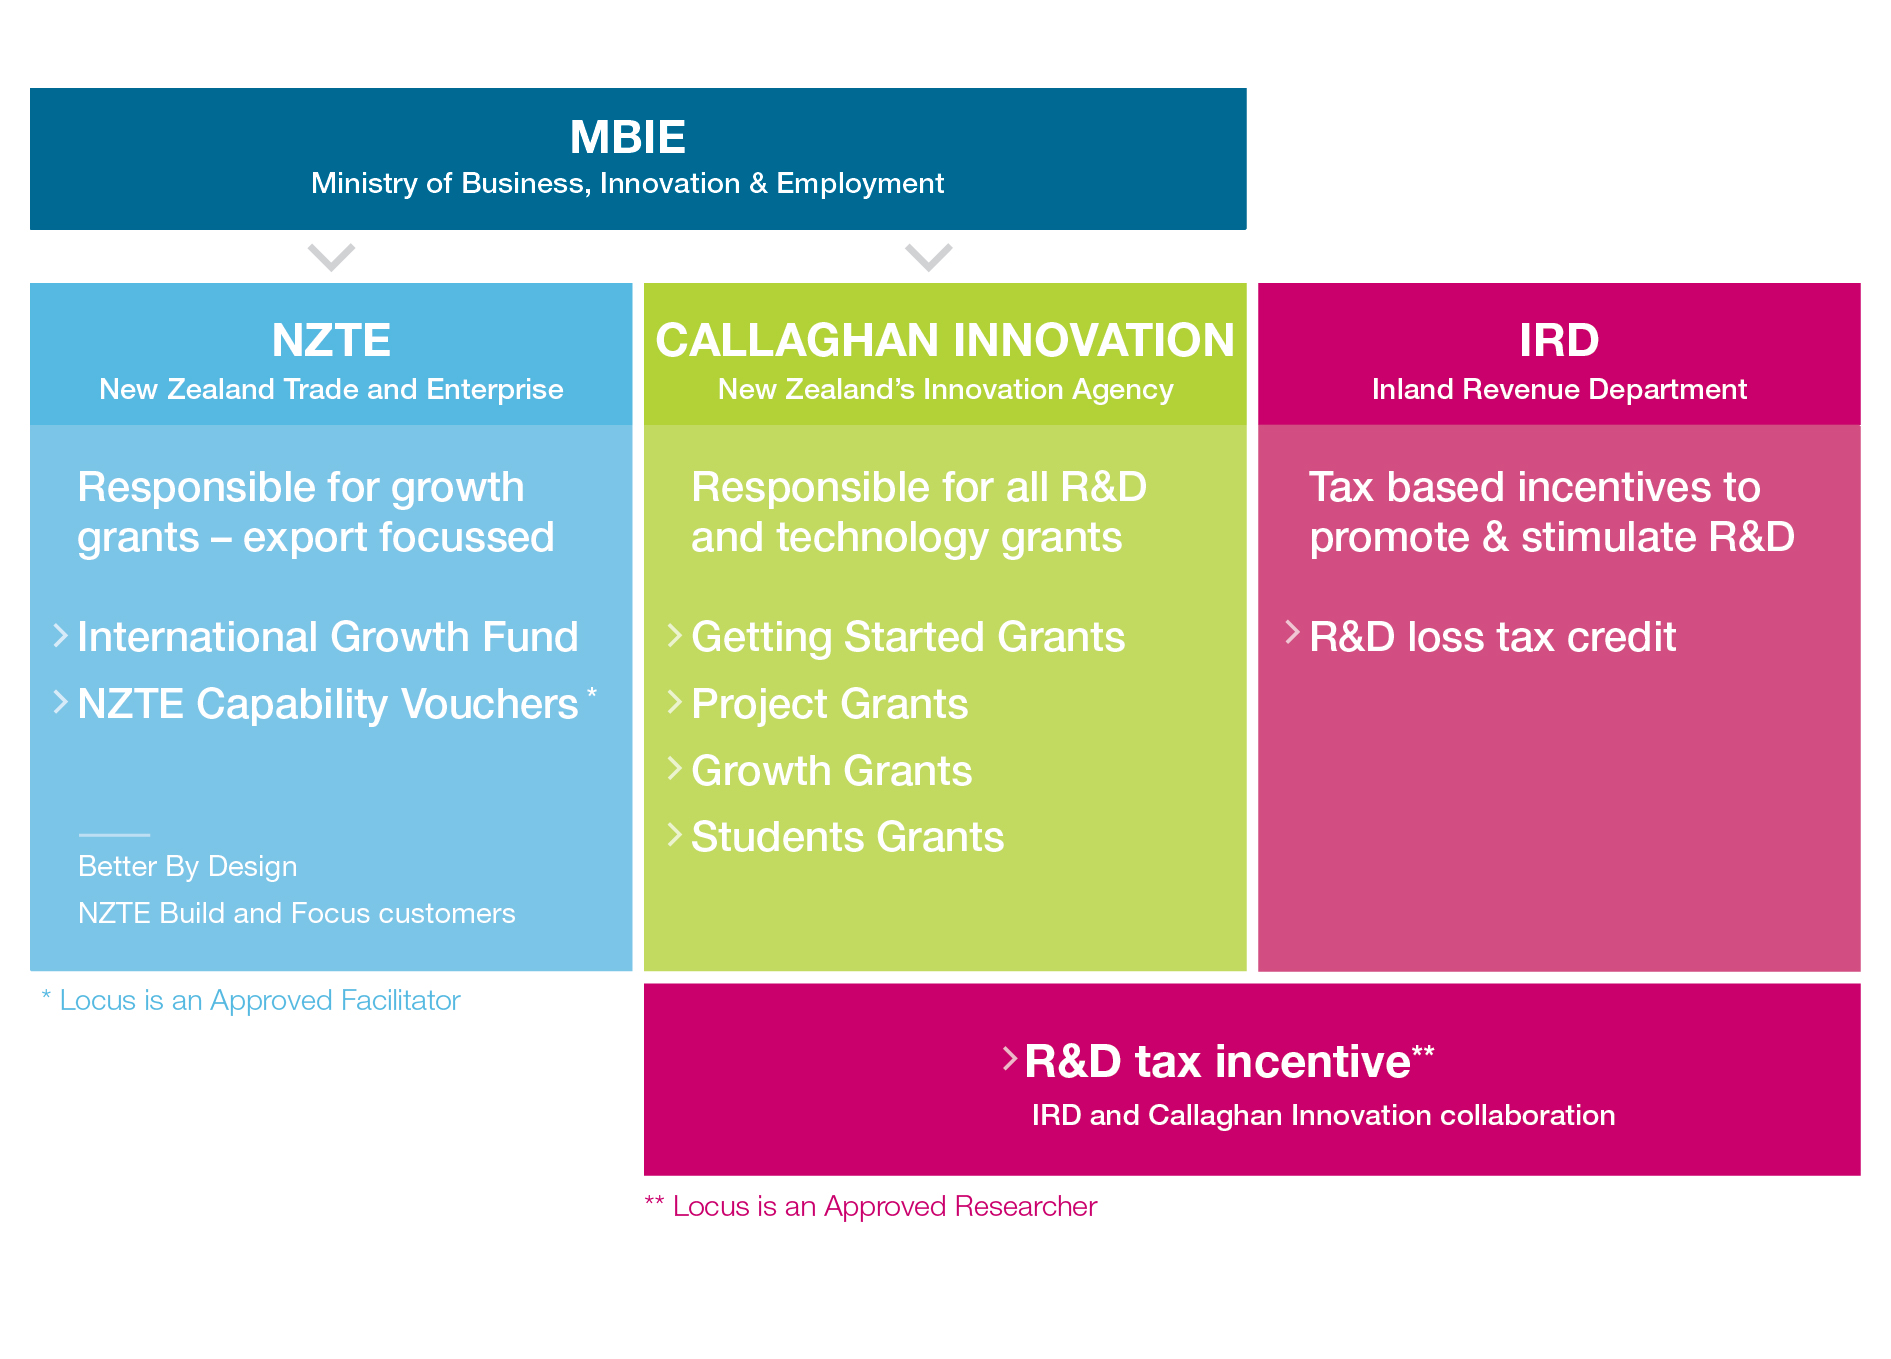 R&D Landscape in New Zealand